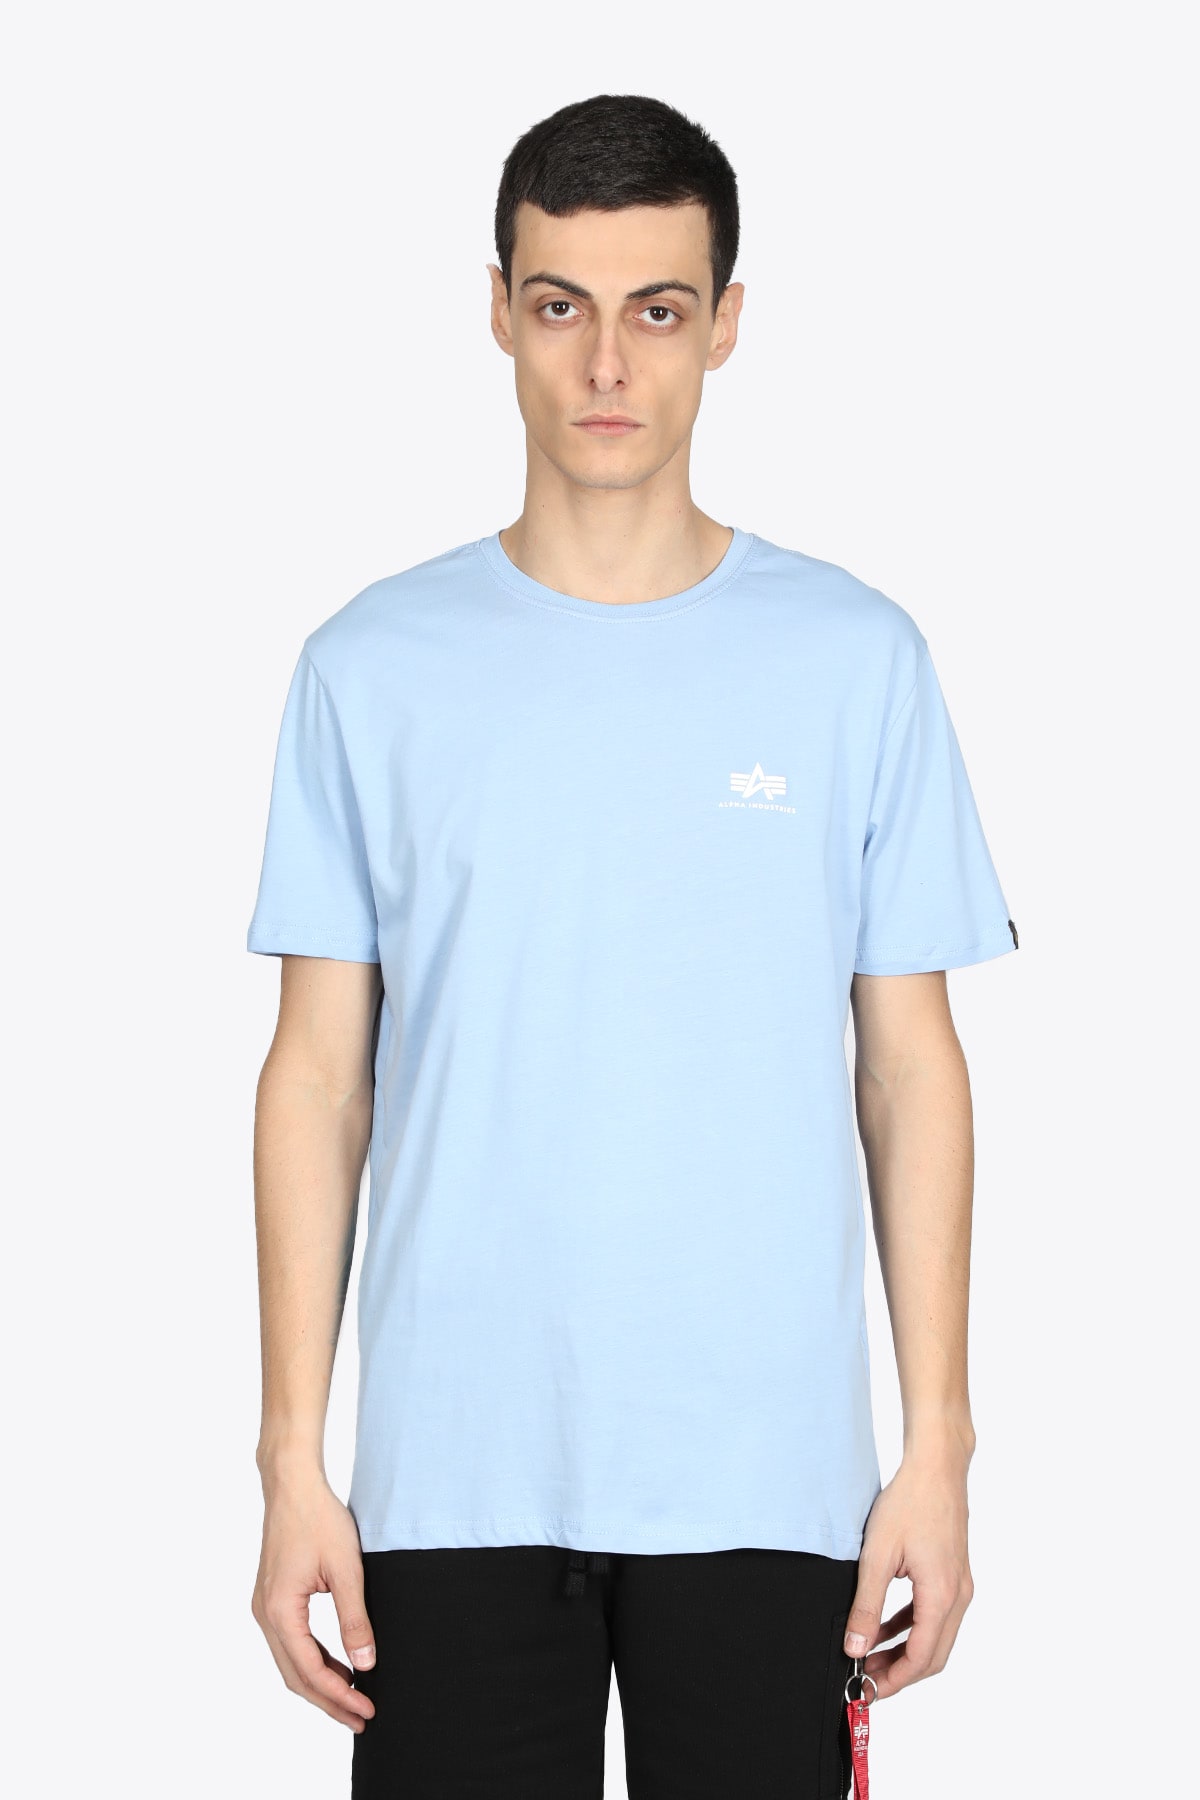 Alpha Industries Basic T Small Logo Light blue cotton t-shirt with small chest logo